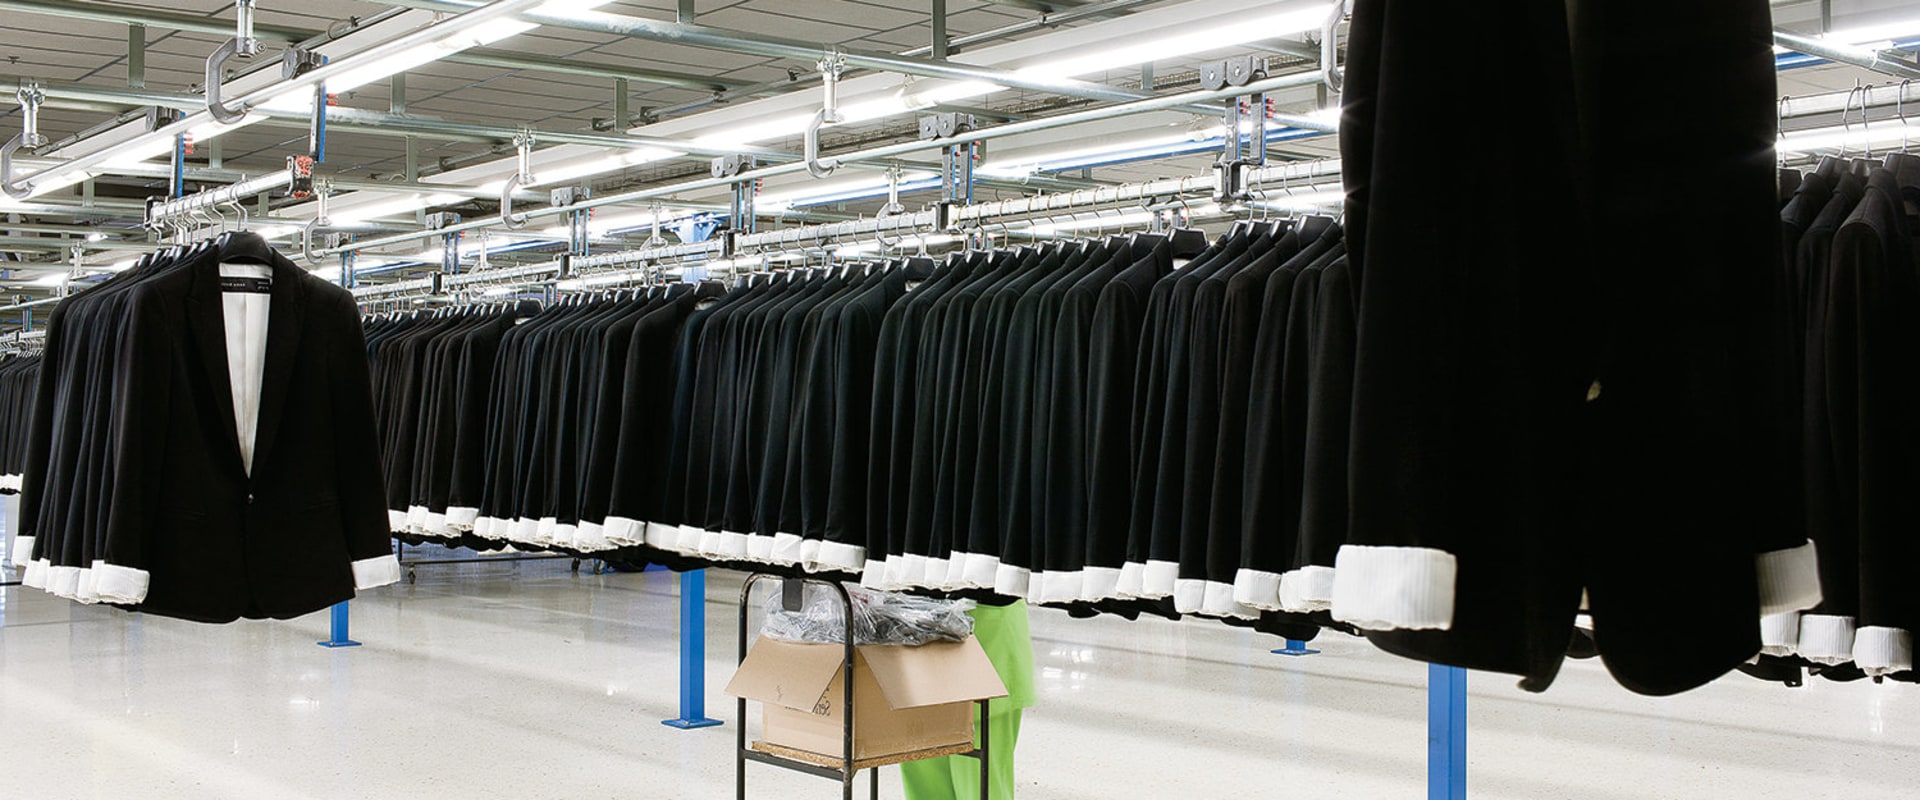 Which is the biggest clothing company in the world?